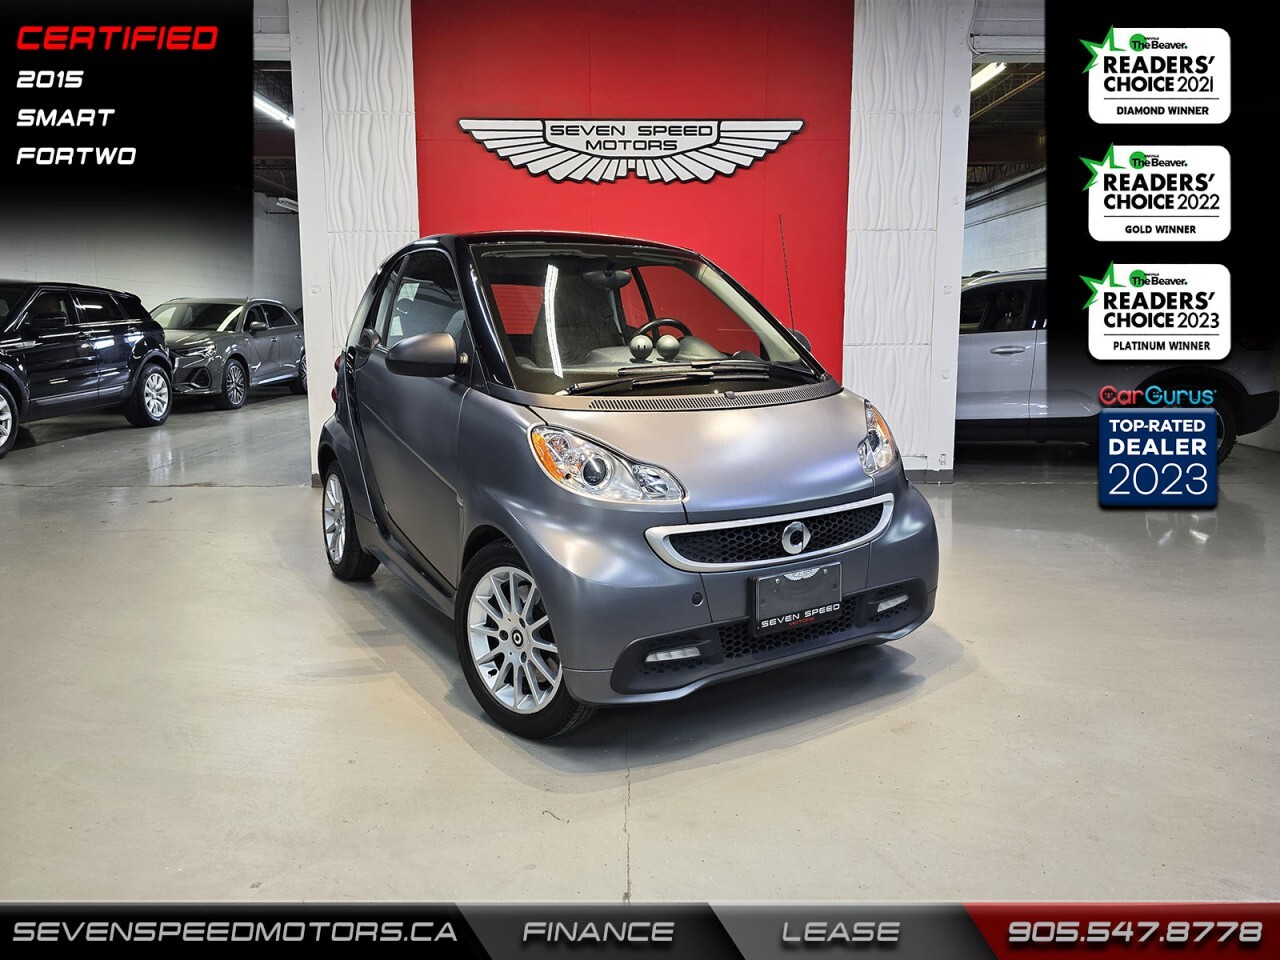 2013 smart fortwo Carfax/Certified/Finance